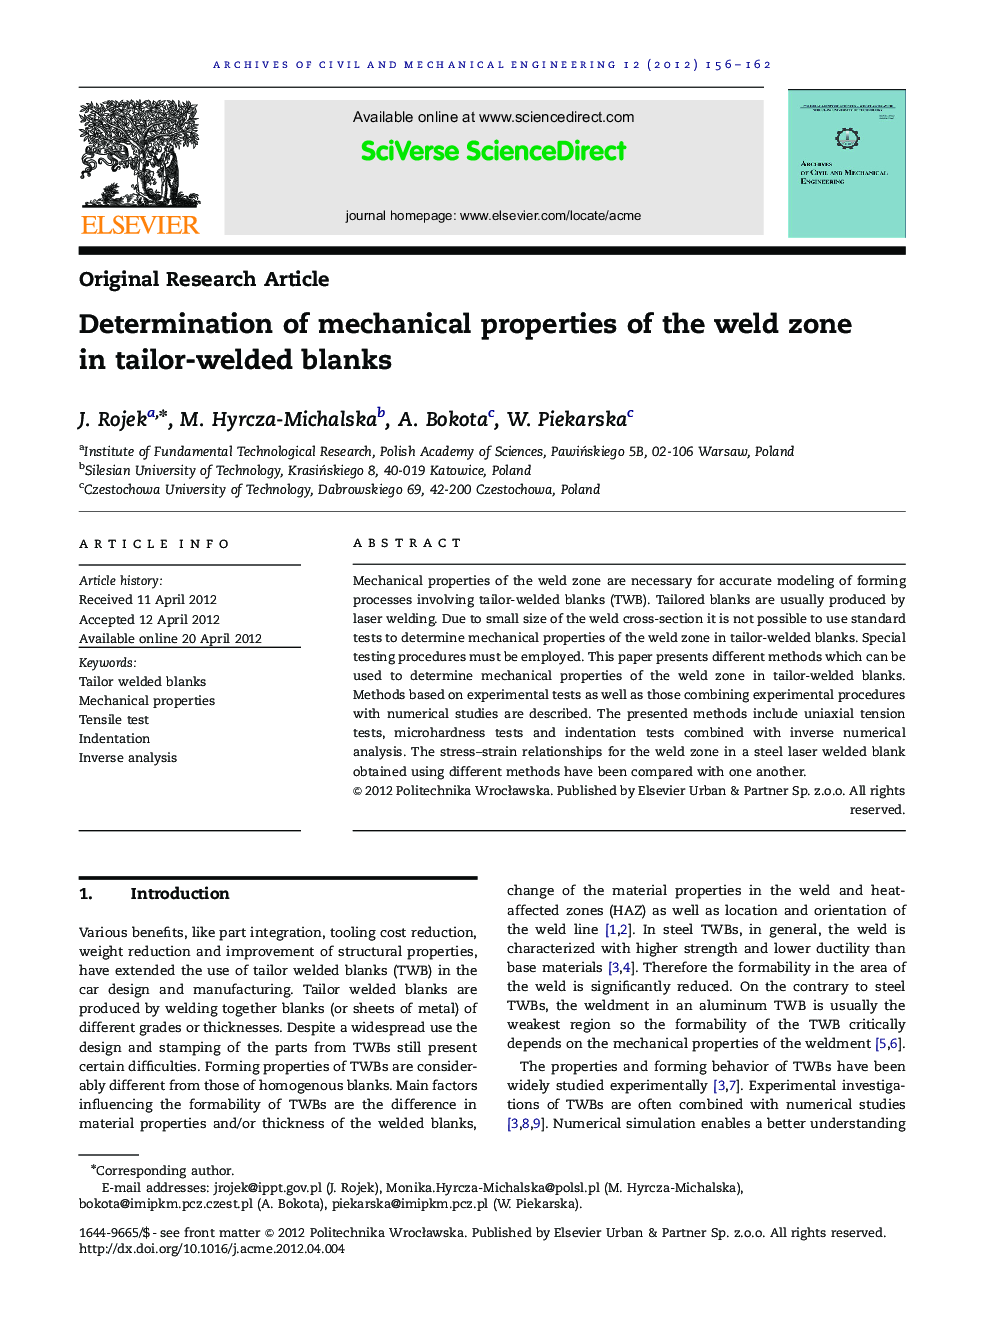 Determination of mechanical properties of the weld zone in tailor-welded blanks